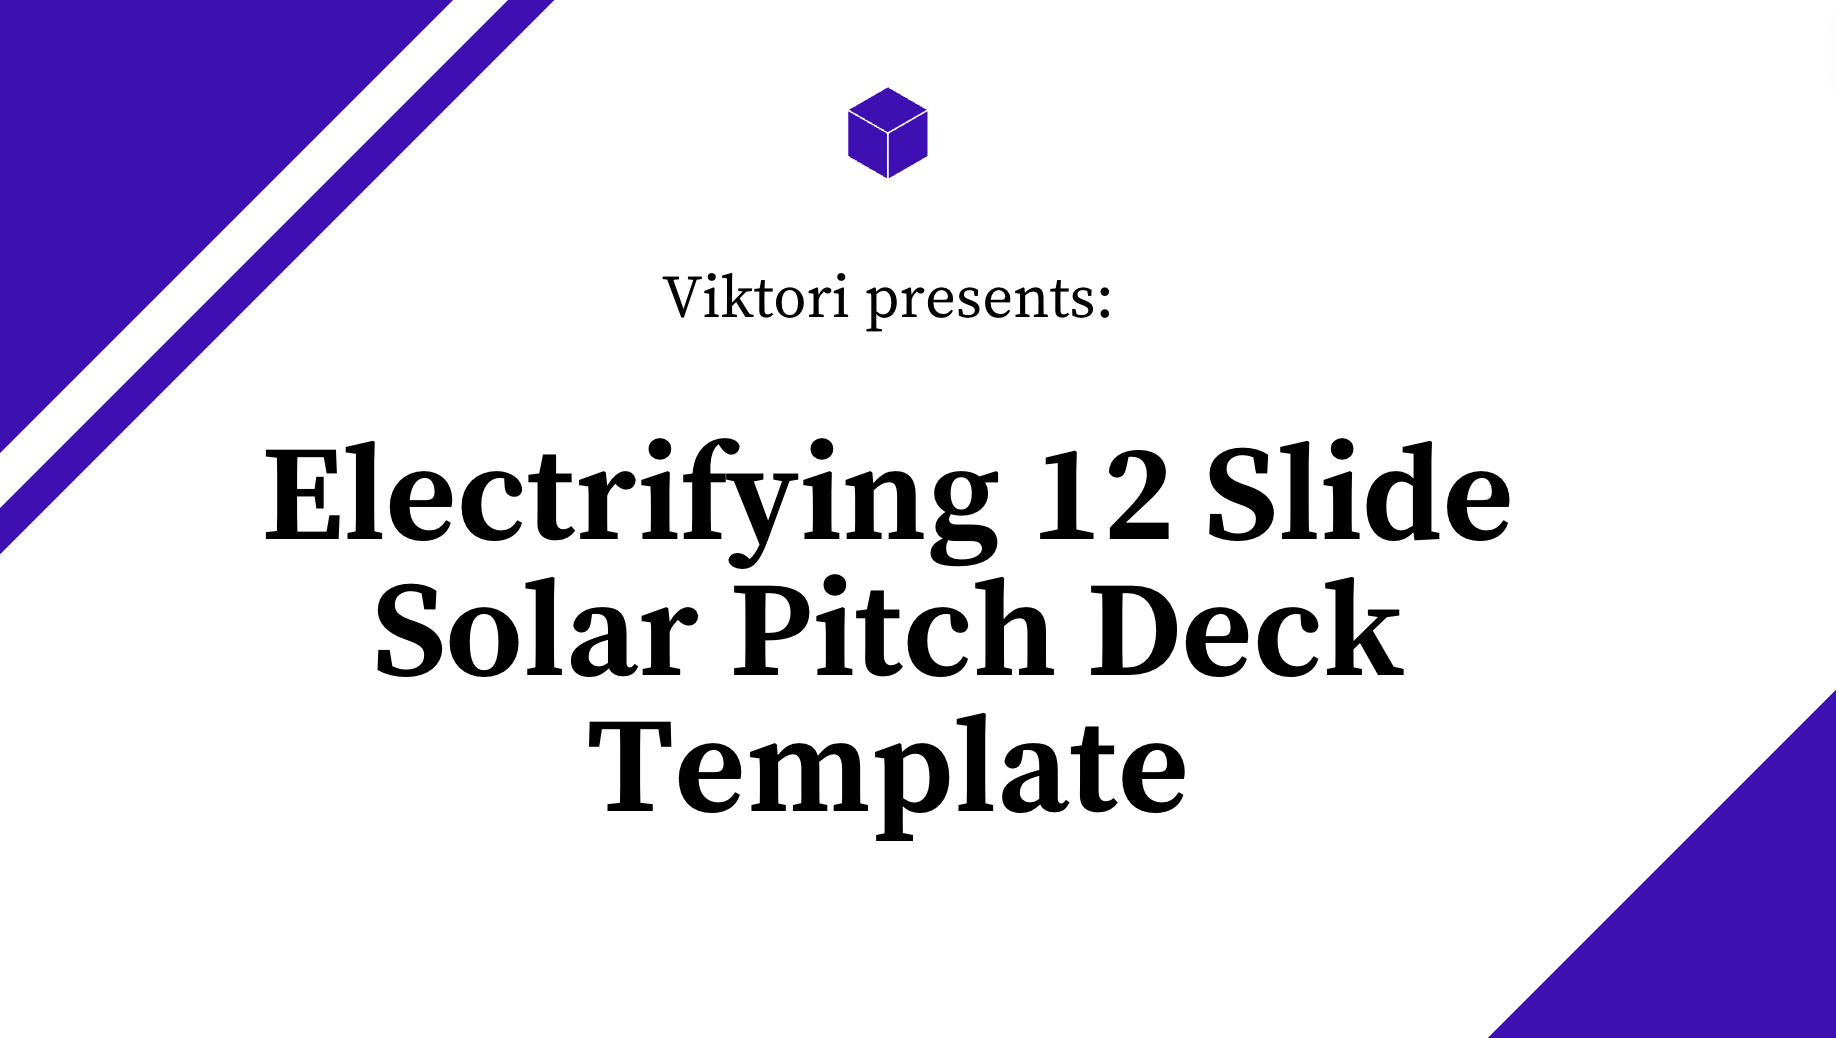 12 Slide Solar Pitch Deck Template to Electrify Your Investors